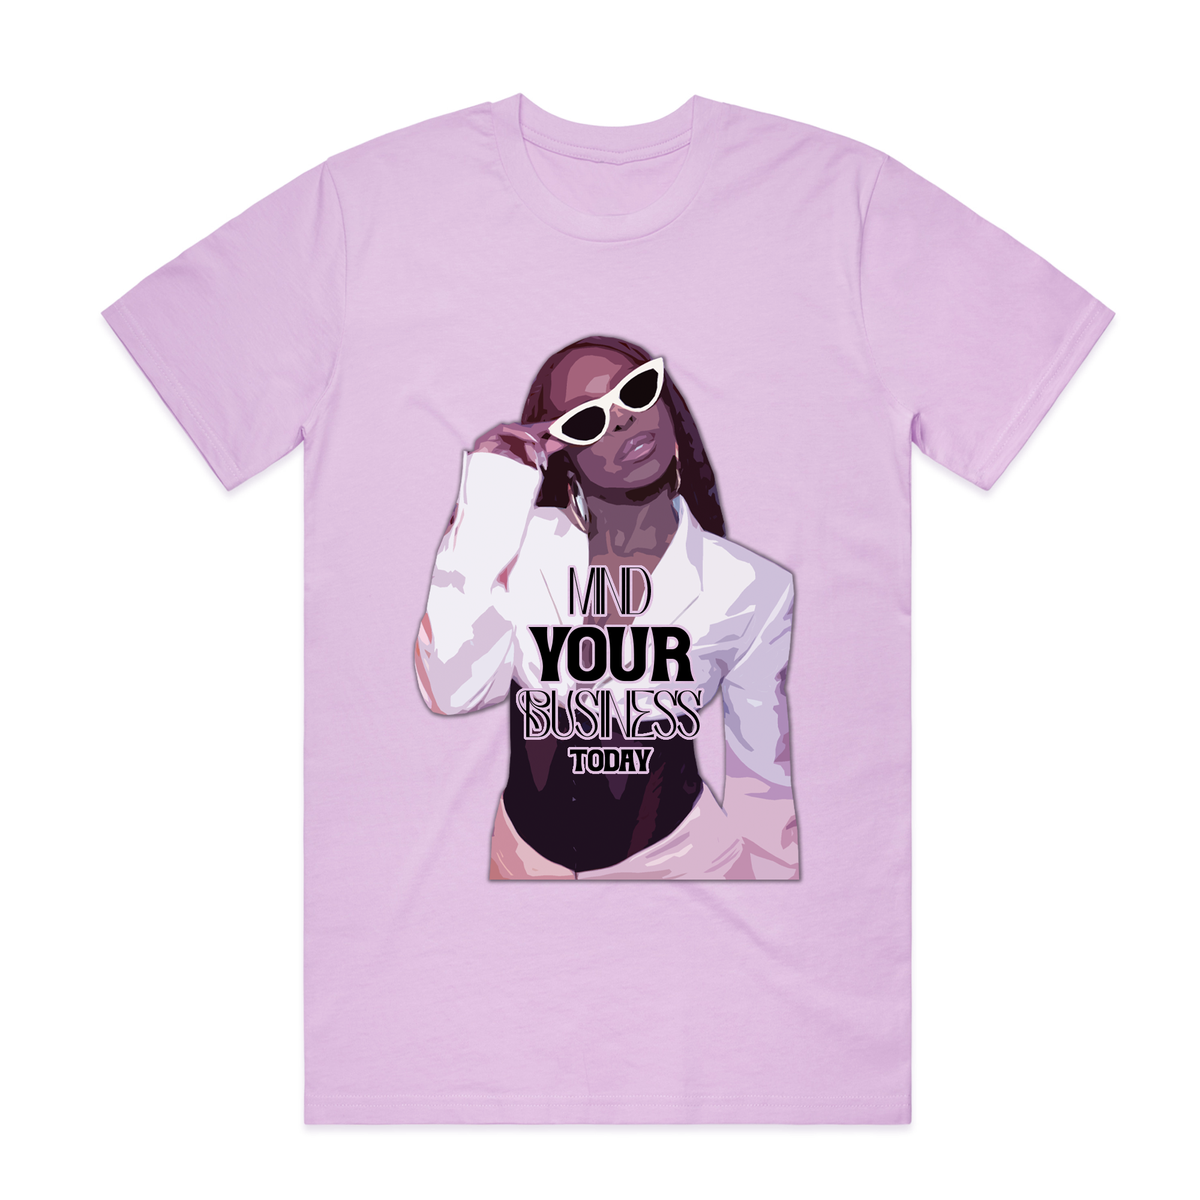 "Mind Your Business Today" Unisex T-Shirt